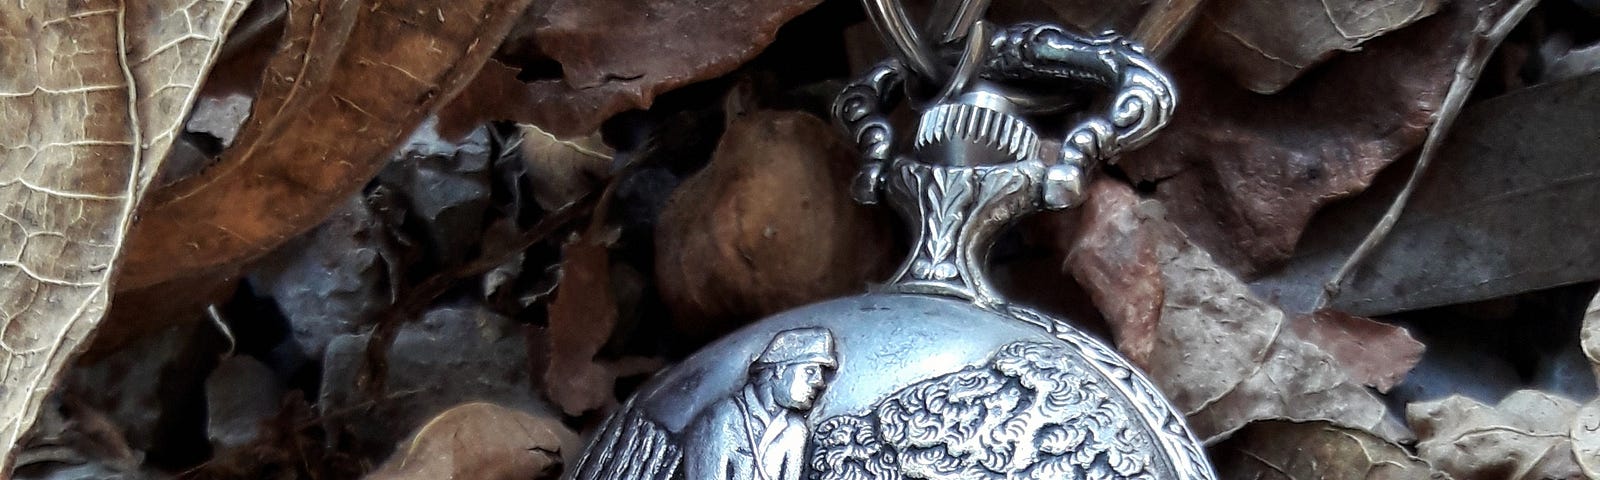 Locket in a bunch of decaying leaves